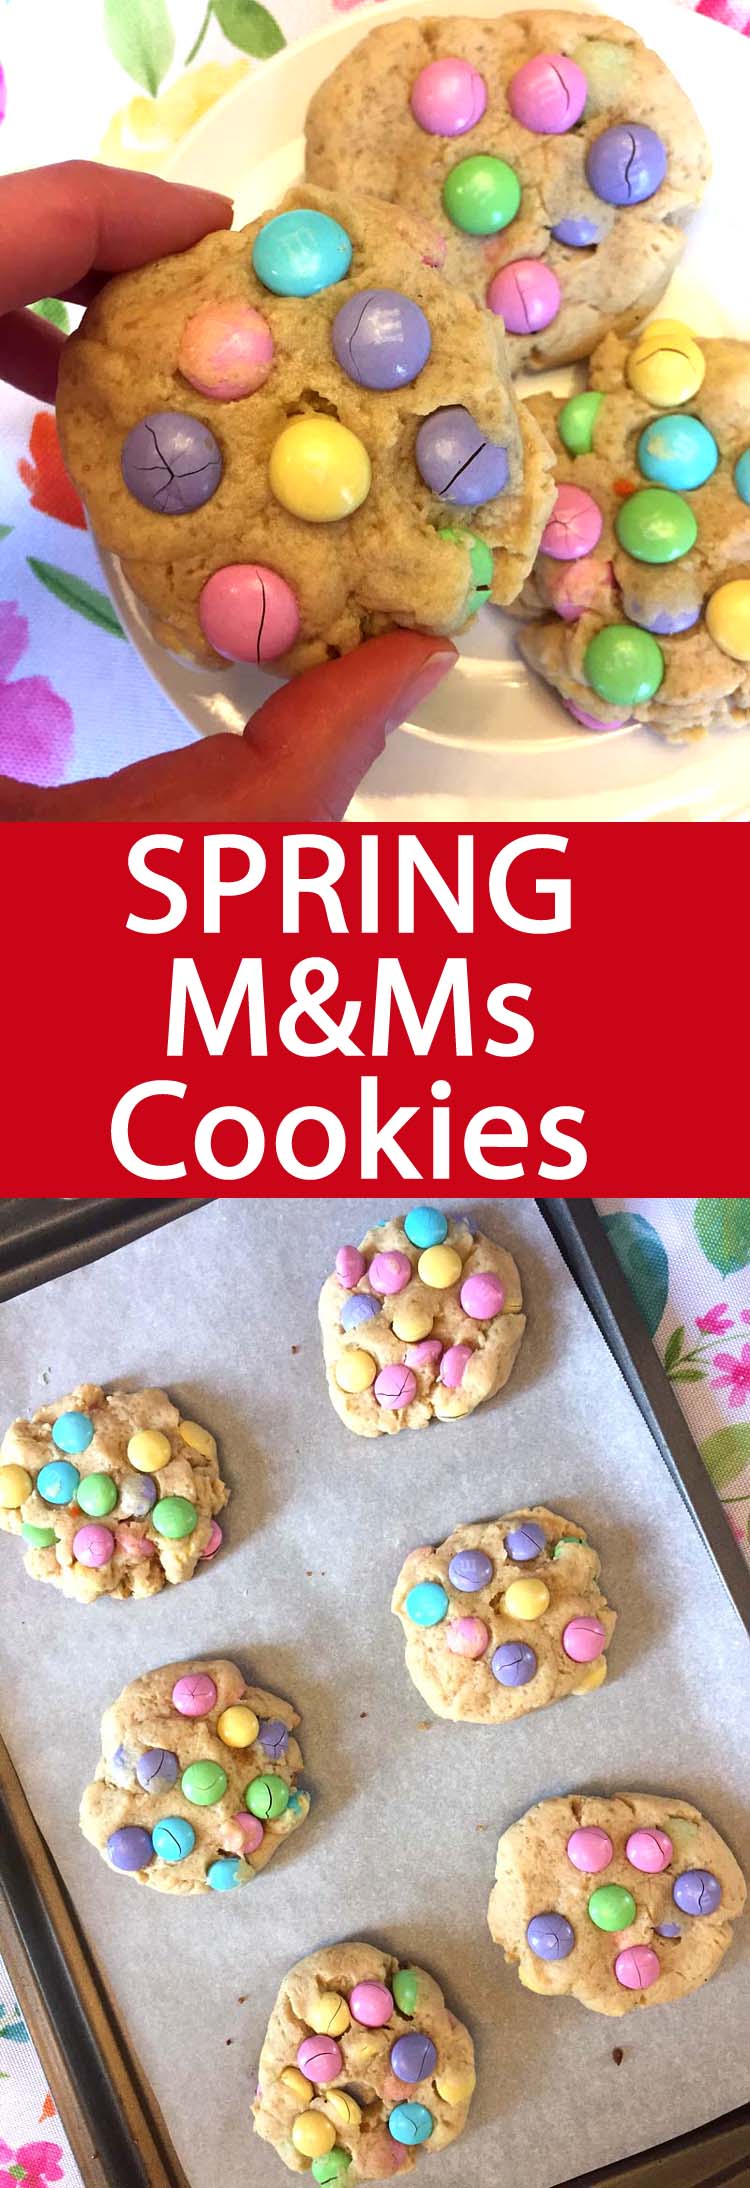 These Easter M&M\'s cookies are amazing! So soft and chewy, they just scream Spring! Super easy to make and so mouthwatering!